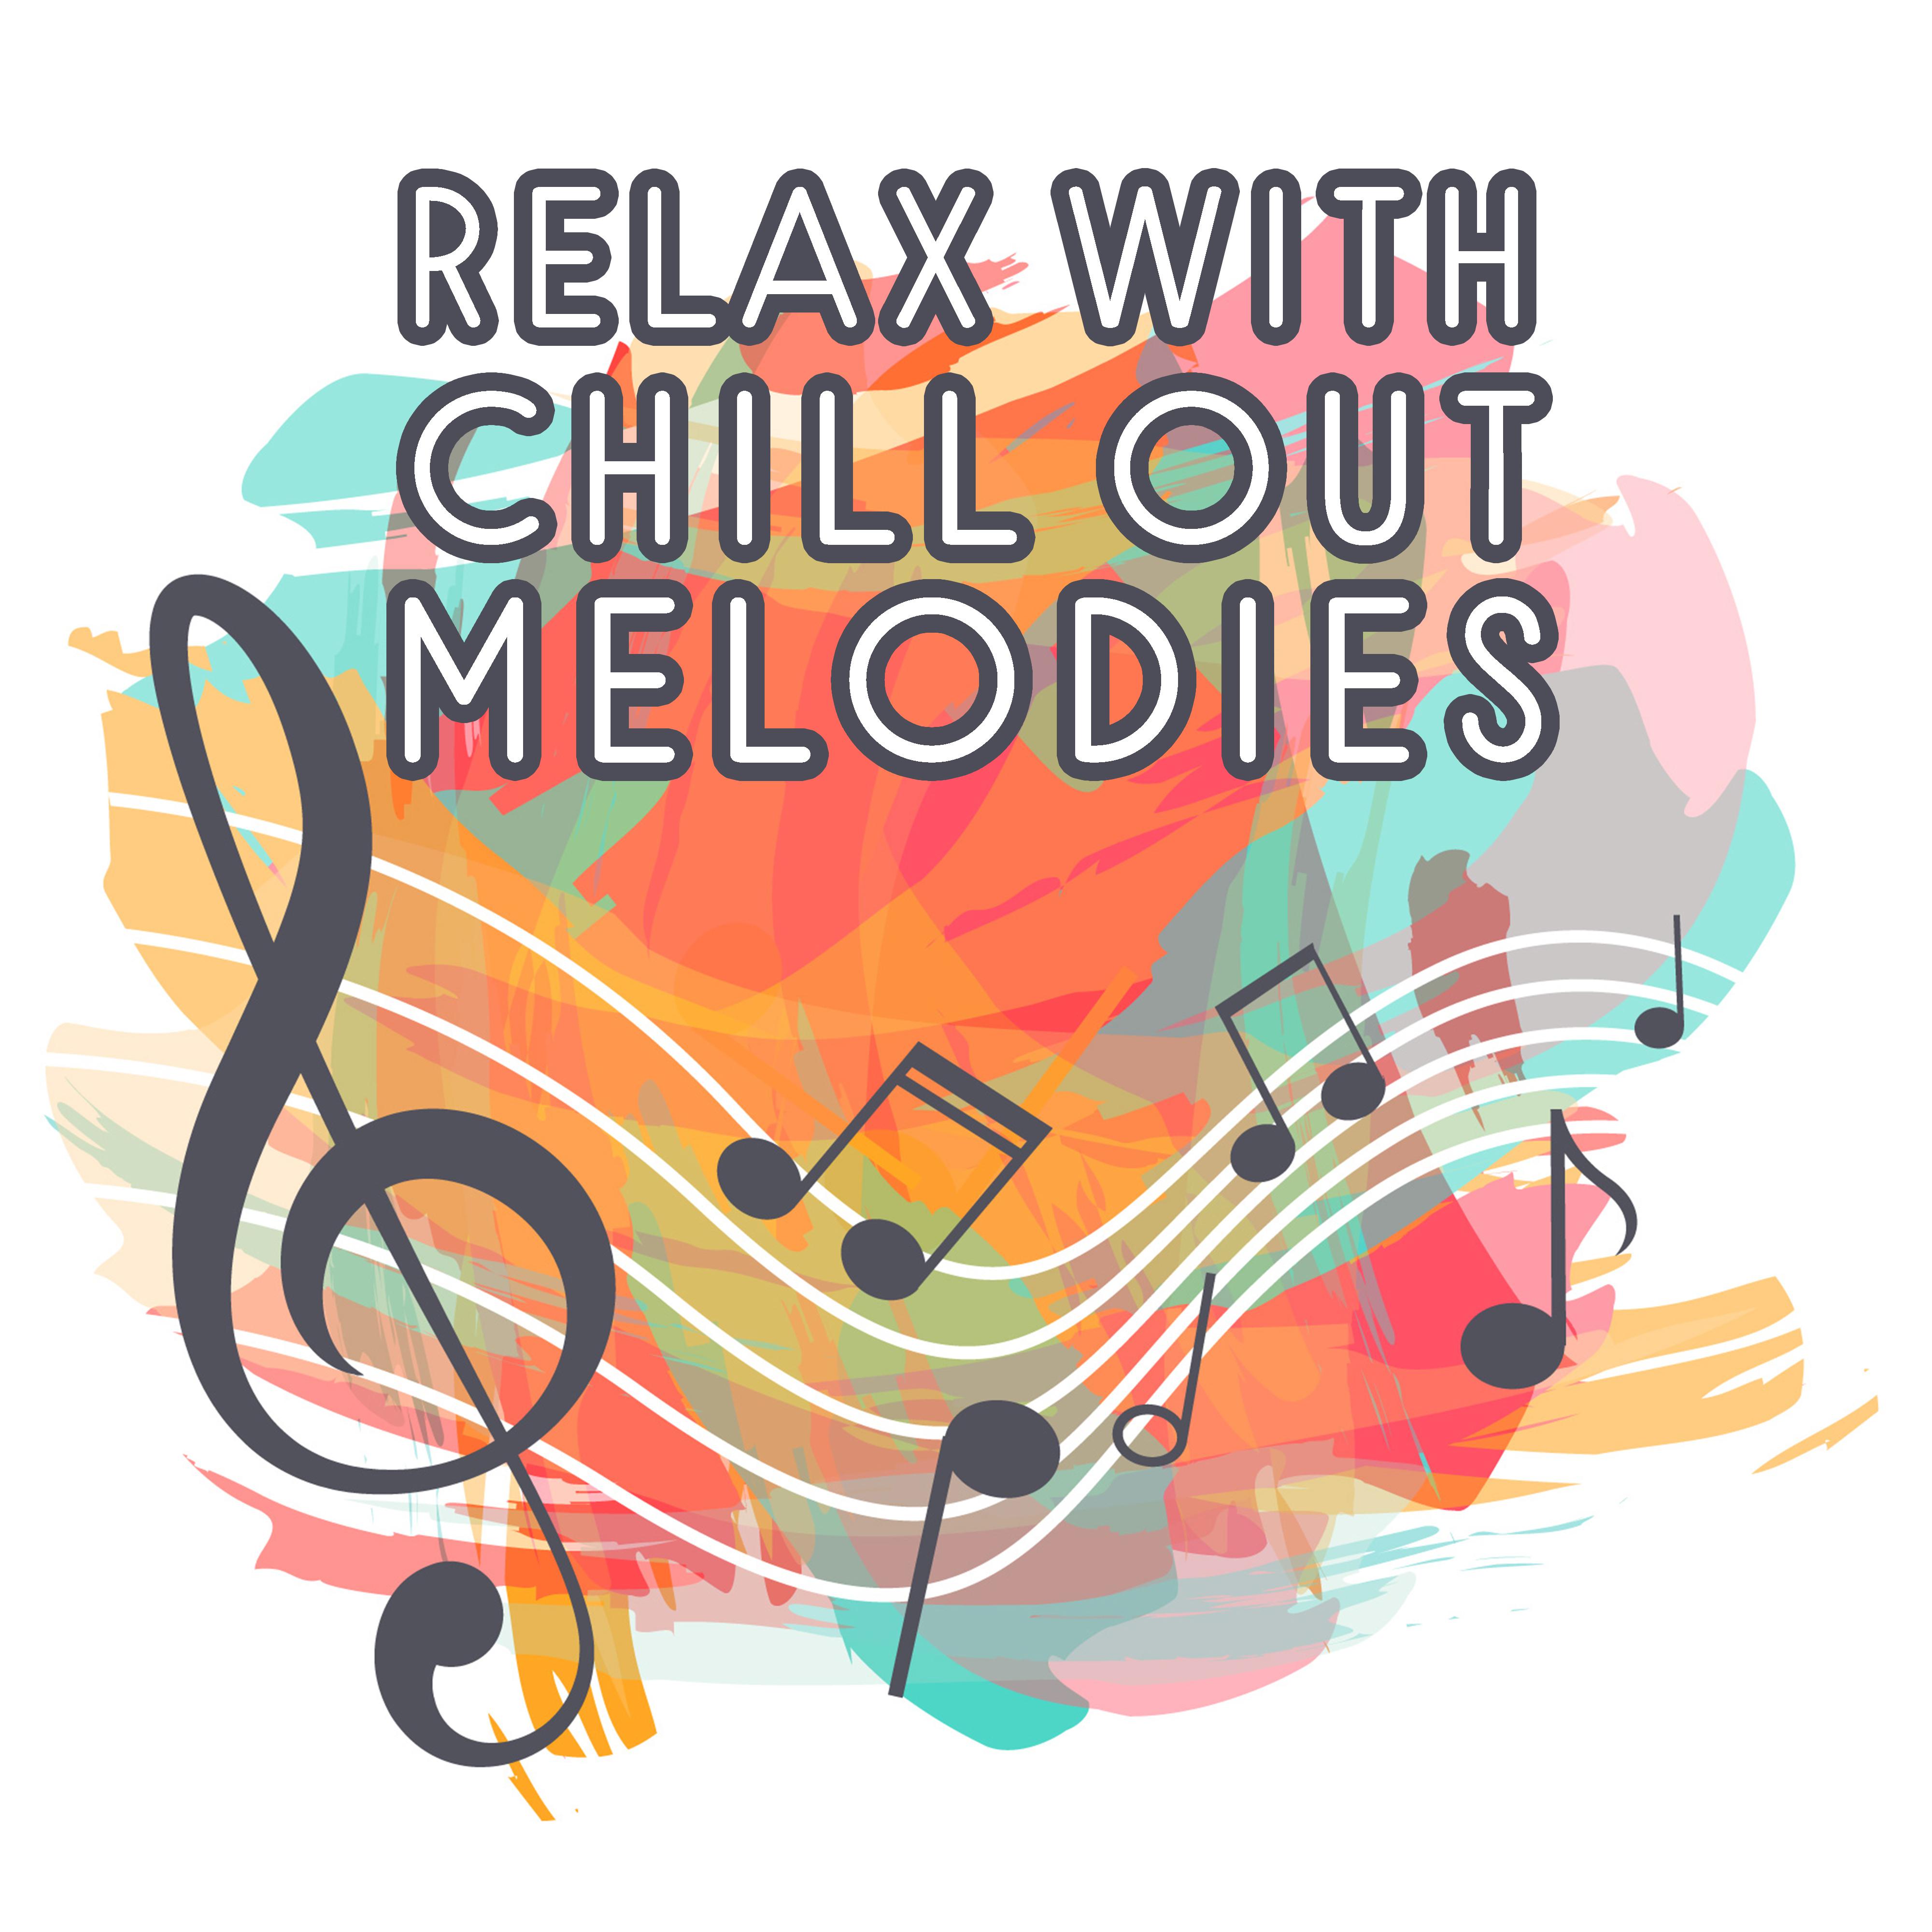 Relax with Chill Out Melodies